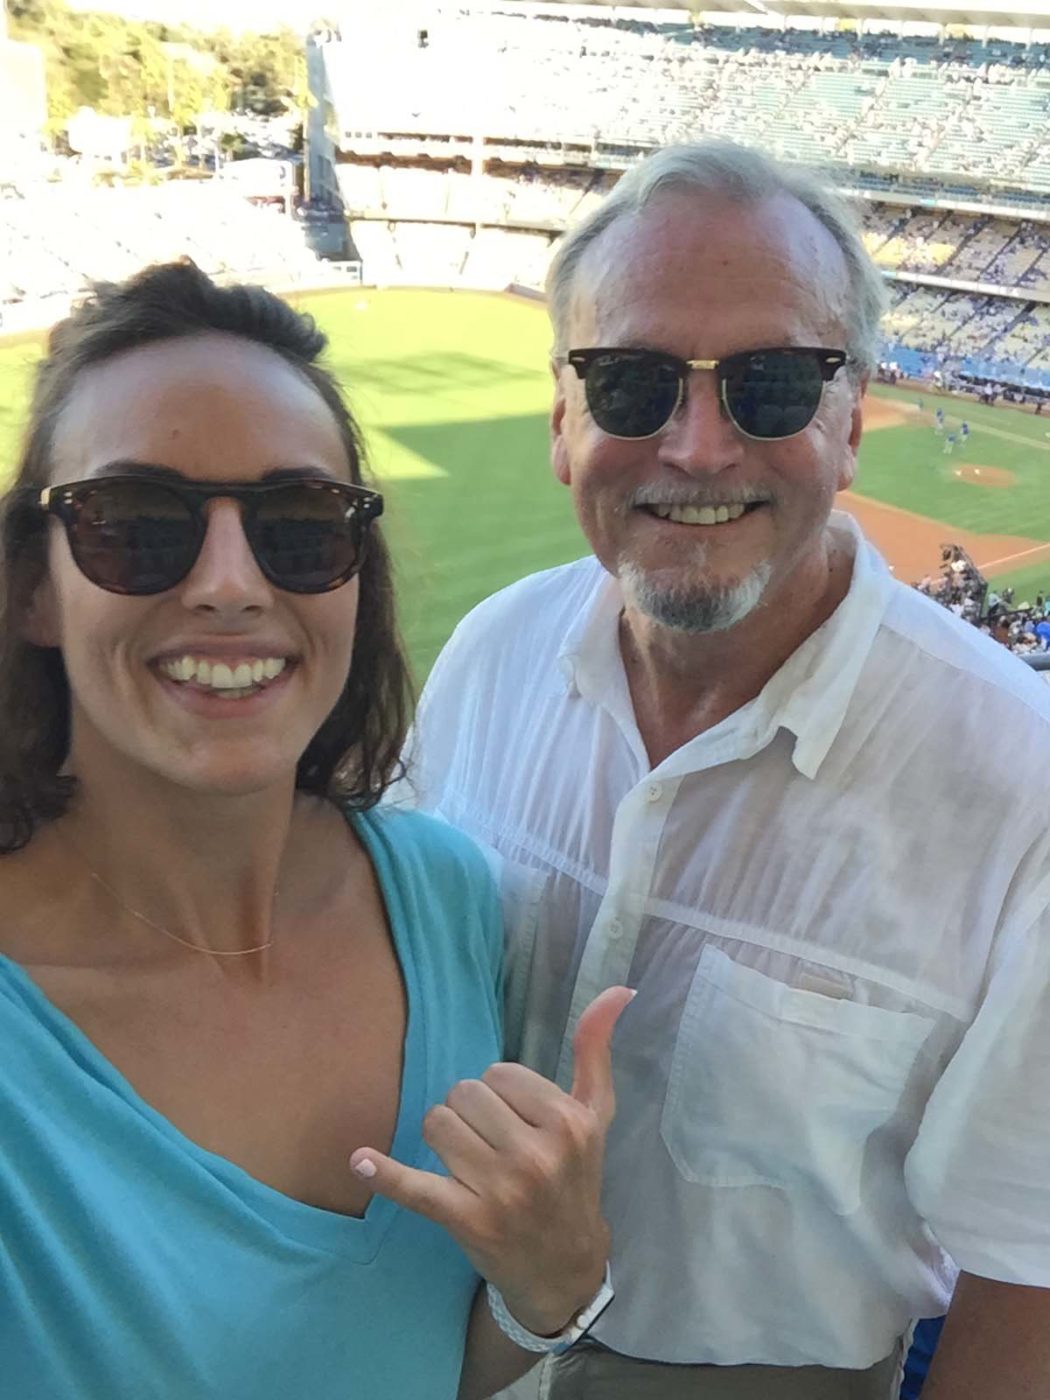 Jessica Stacy's photo of her and her dad at Dodgers Stadium thanks to Playing with Science and TuneIn.